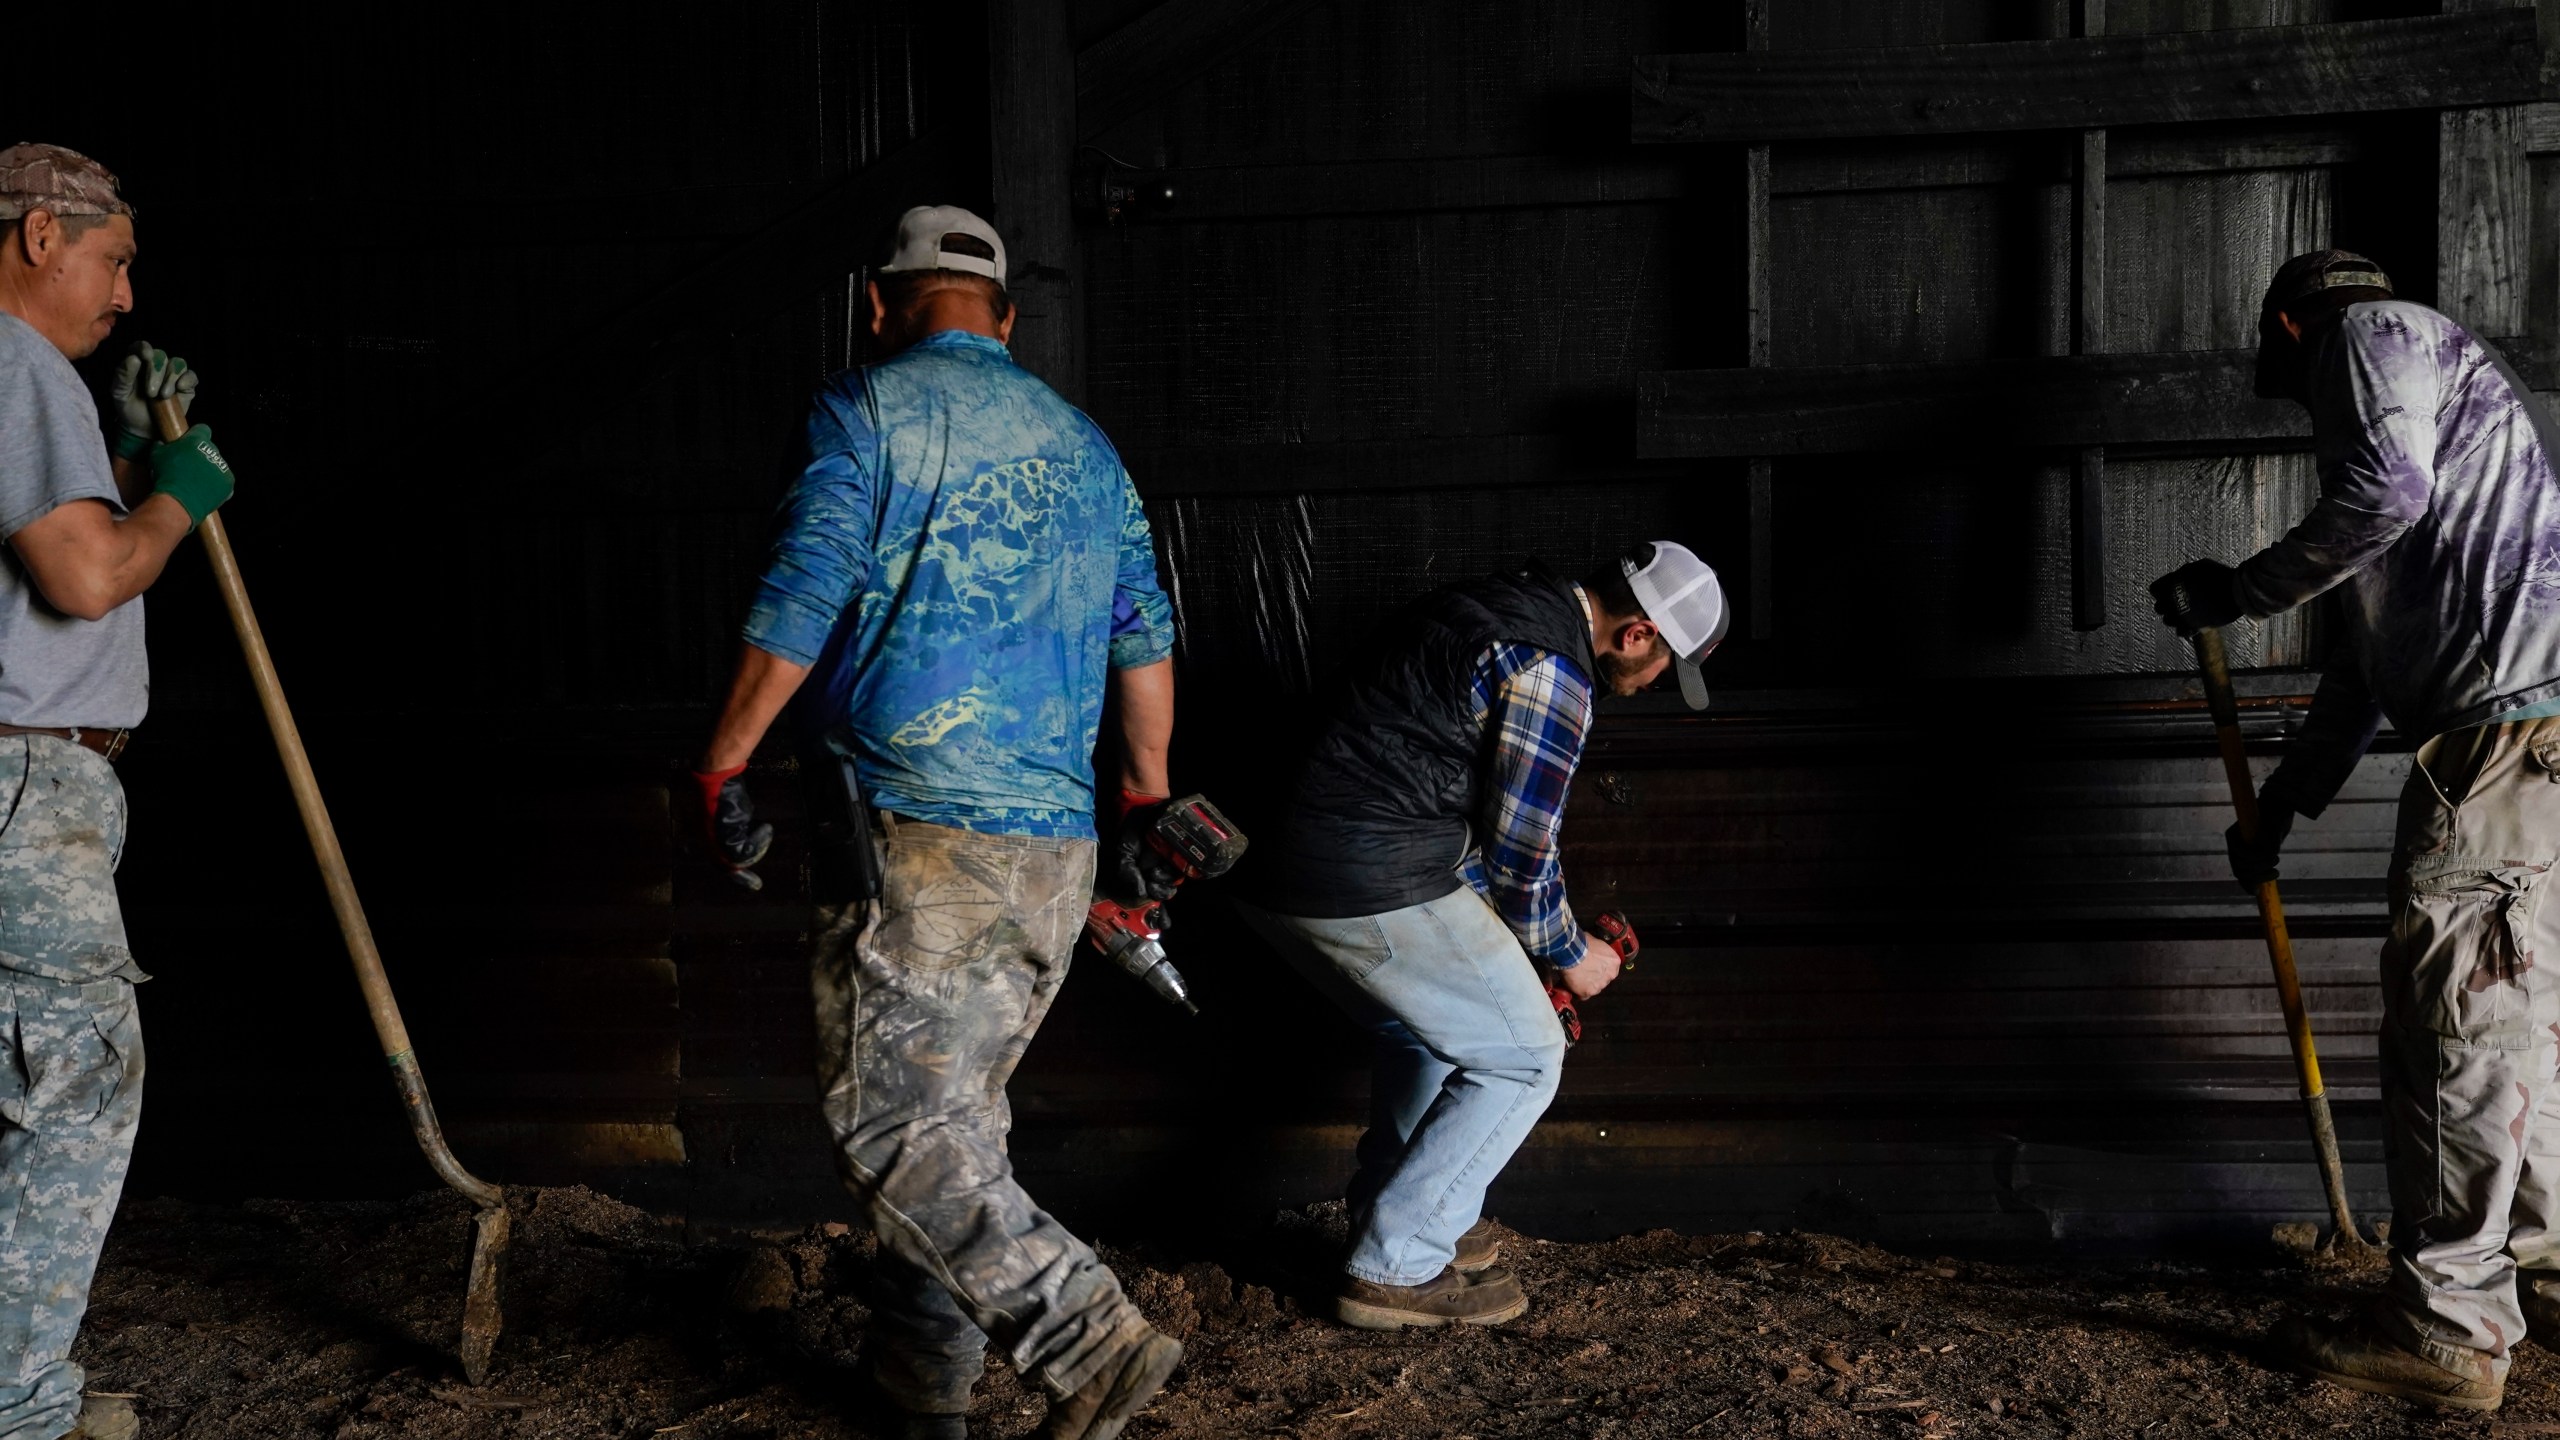 Contract workers Miguel Angel, left, Fernando Osorio Loya, second from left, and Fredy Osorio, right, all from Veracruz, Mexico, work with Jamie Graham, second from right, as they remove a piece of sheet metal from the inside of a tobacco barn, Tuesday, March 12, 2024, at a farm in Crofton, Ky. The latest U.S. agricultural census data shows an increase in the proportion of farms utilizing contract labor compared to those hiring labor overall. (AP Photo/Joshua A. Bickel)